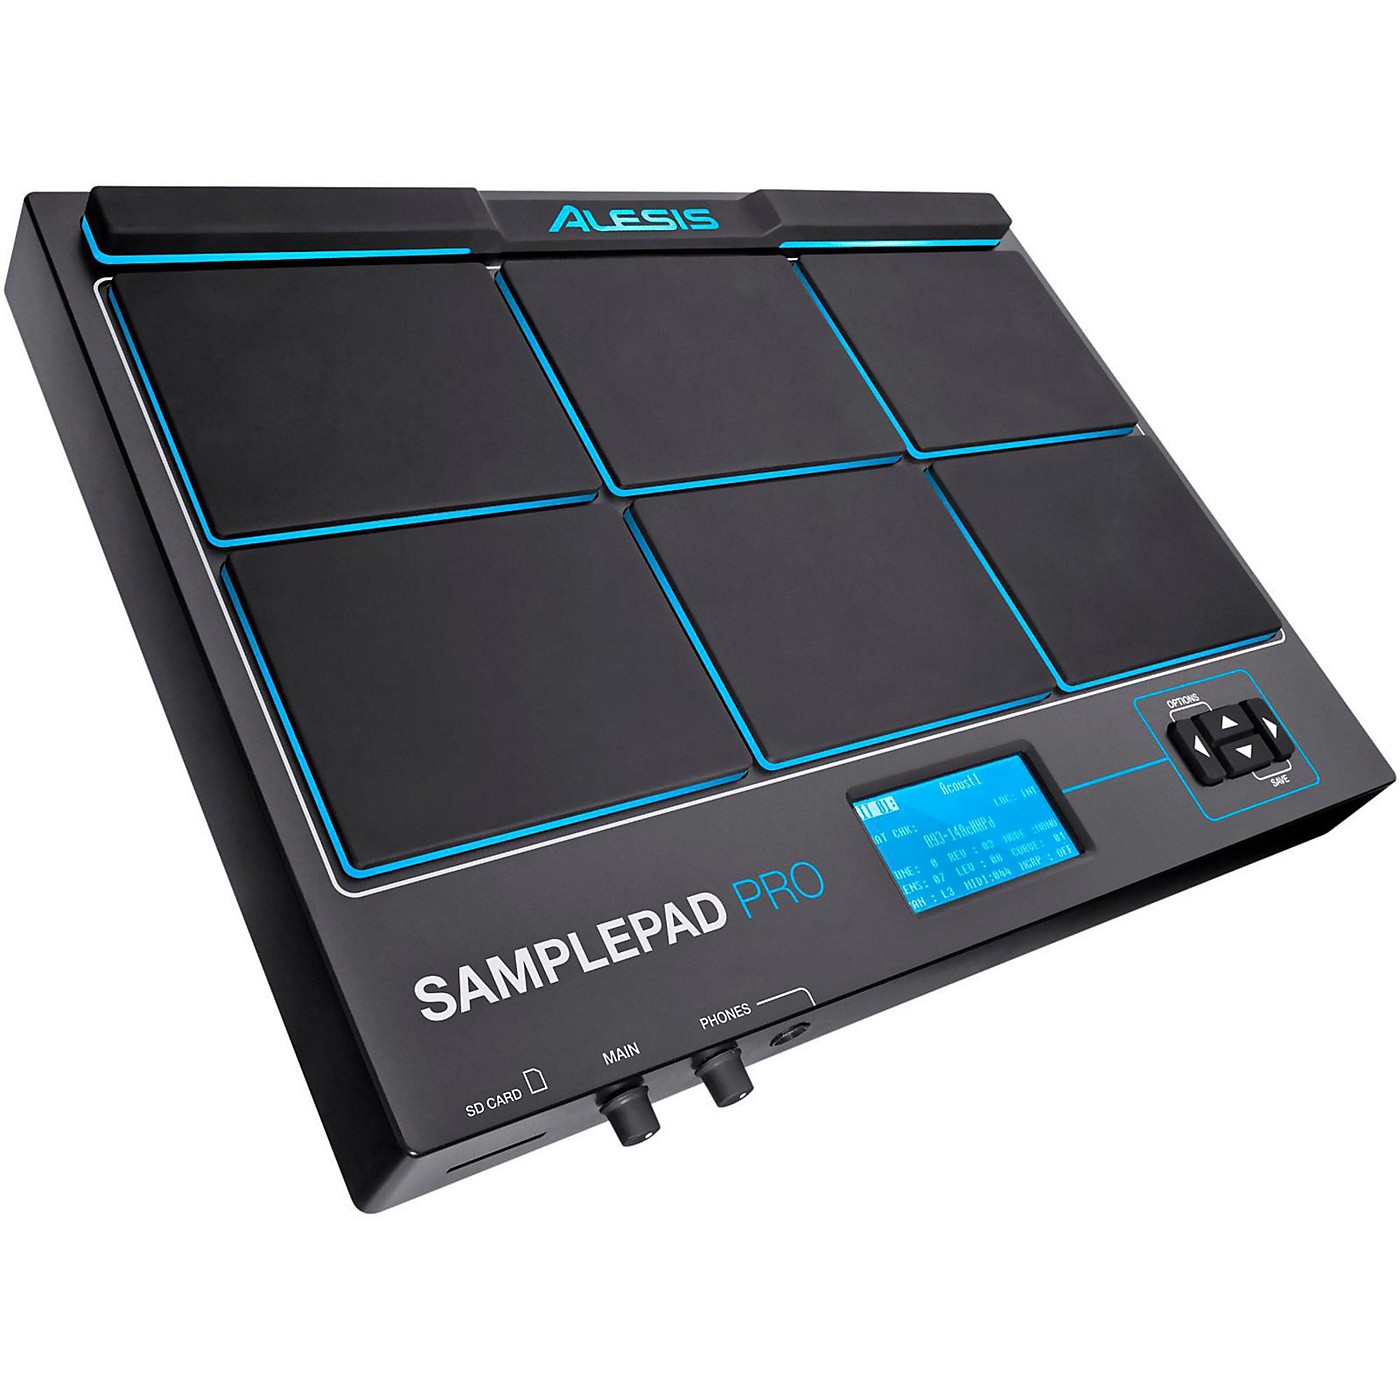 Alesis Sample Pad Pro Percussion Pad With Onboard Sound Storage thumbnail